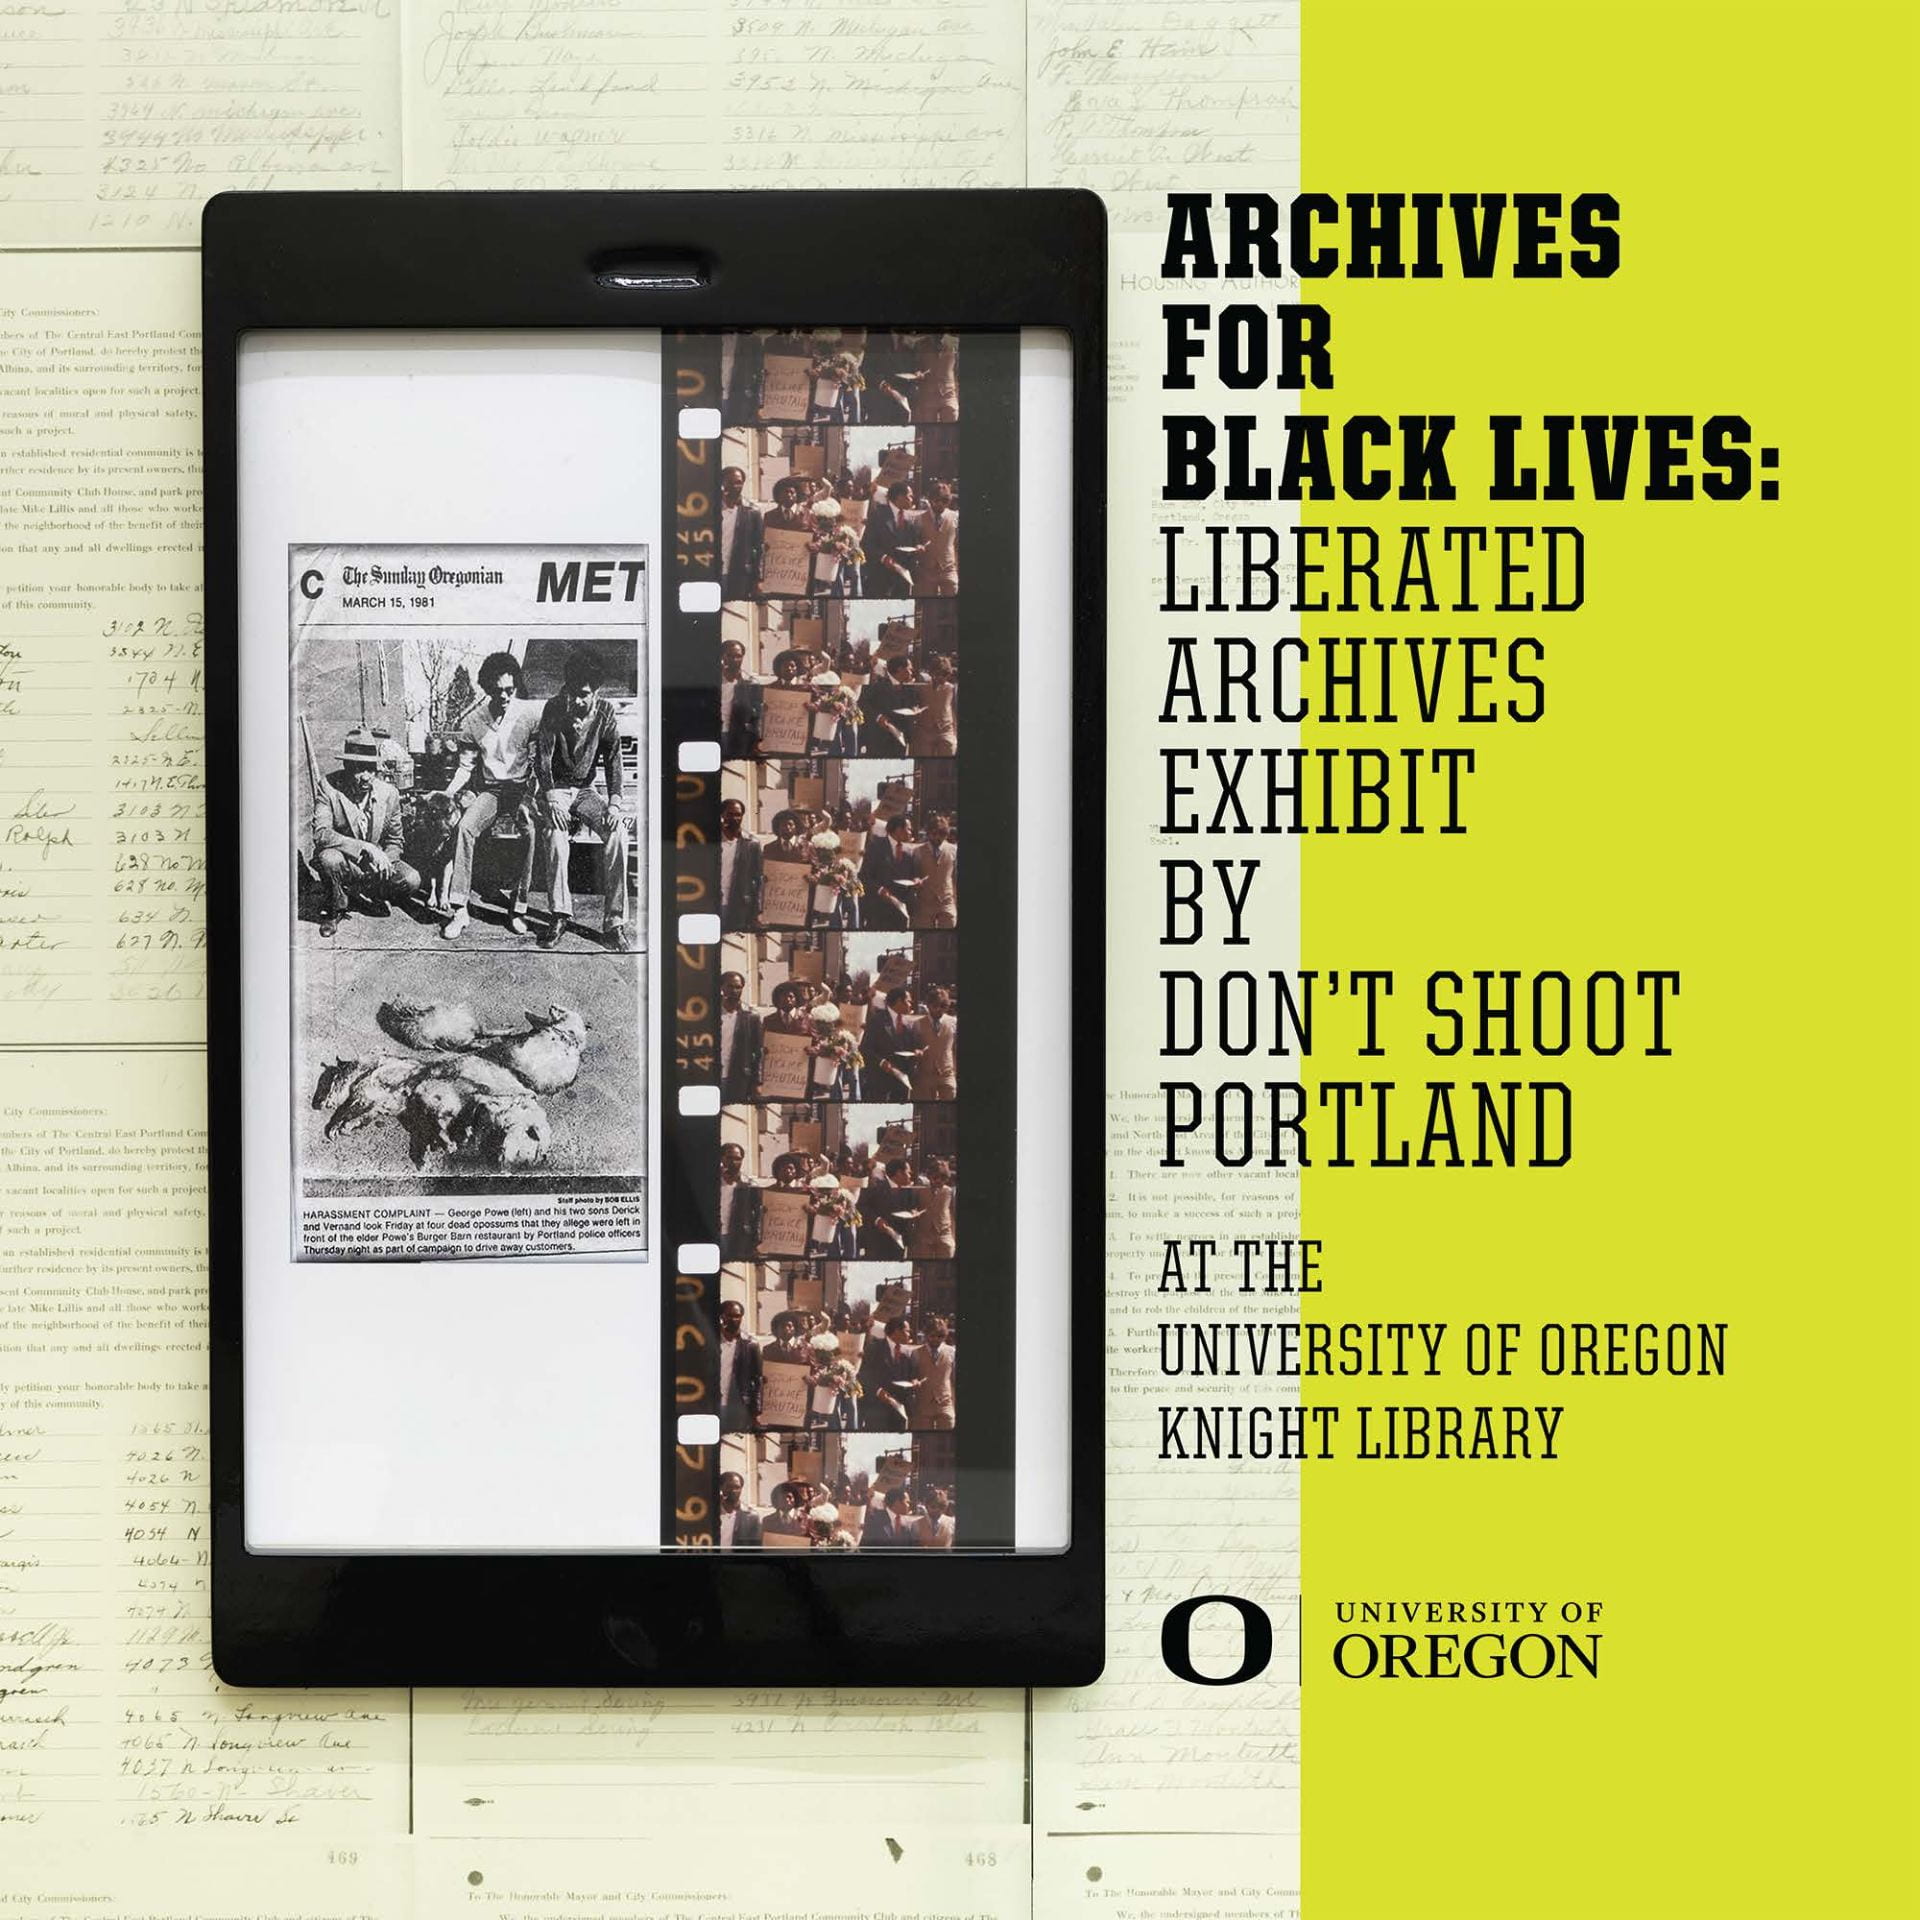 Exhibition poster for "Archives for Black Lives: Liberated Archives by Don't Shoot Portland"